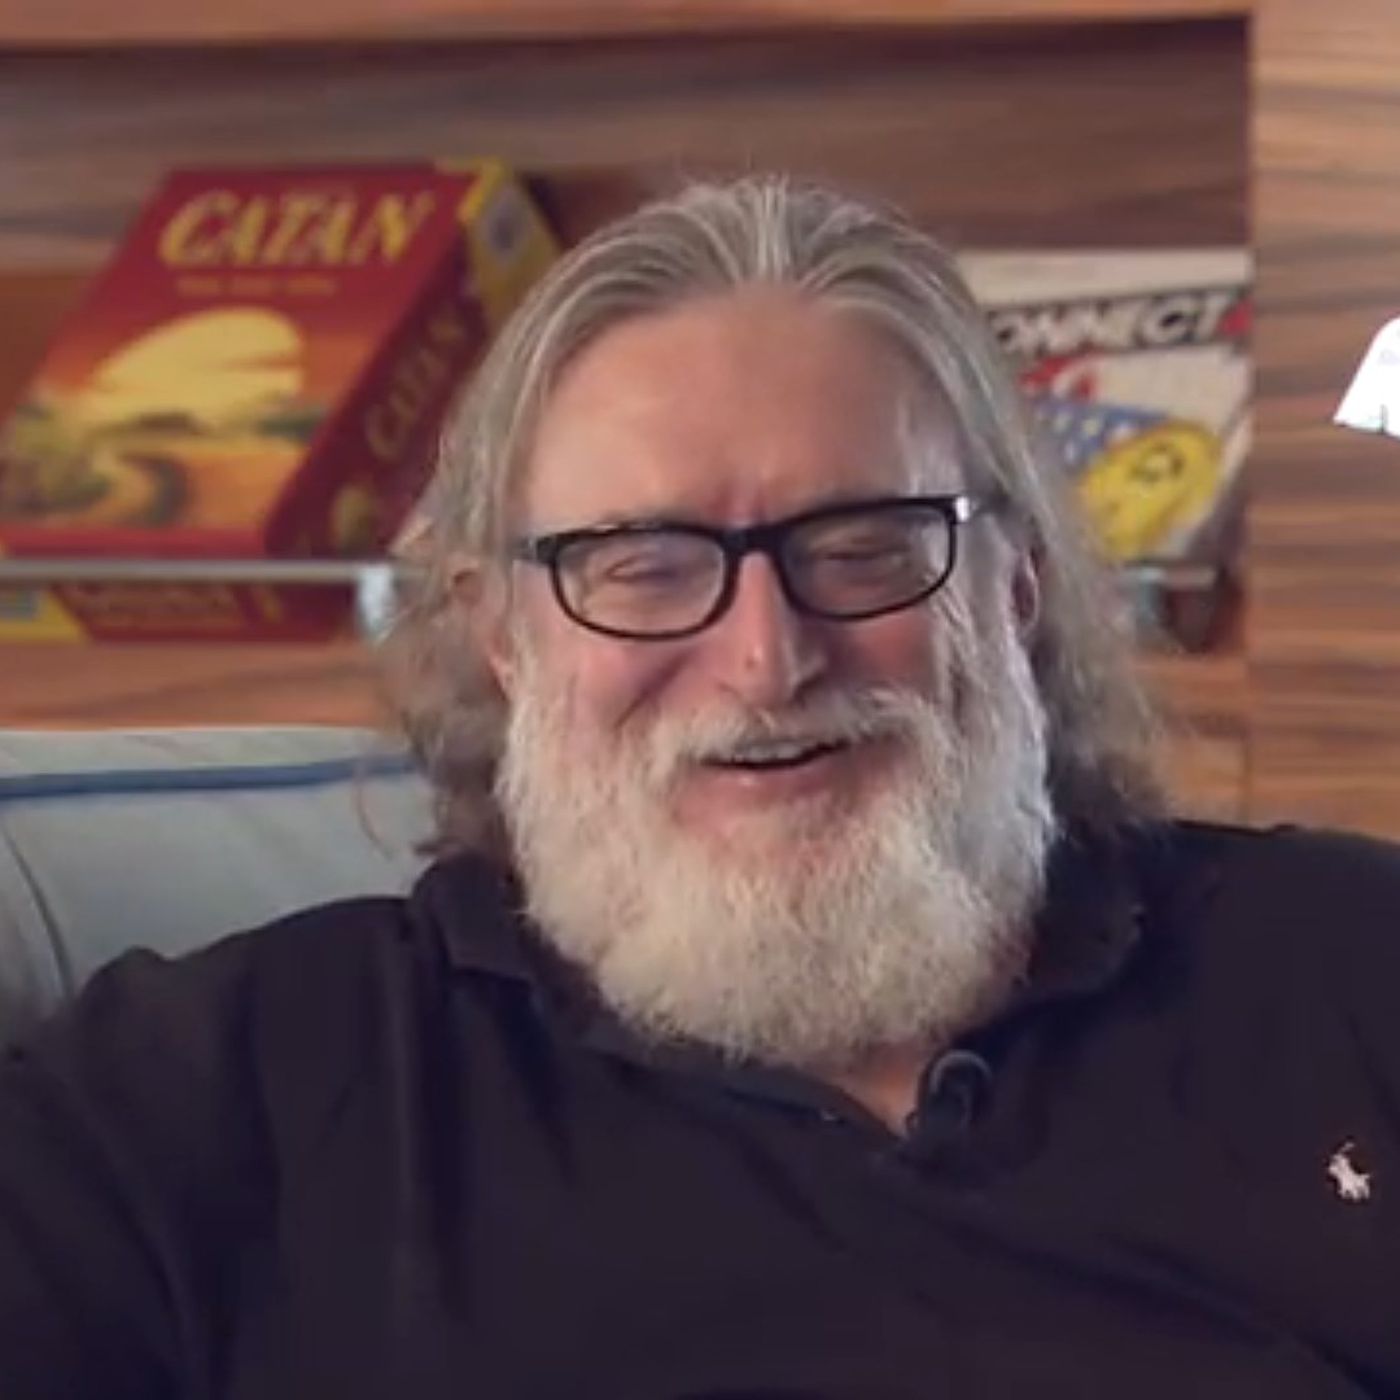 Gabe Newell grows spectacular beard. Also says something about DRM